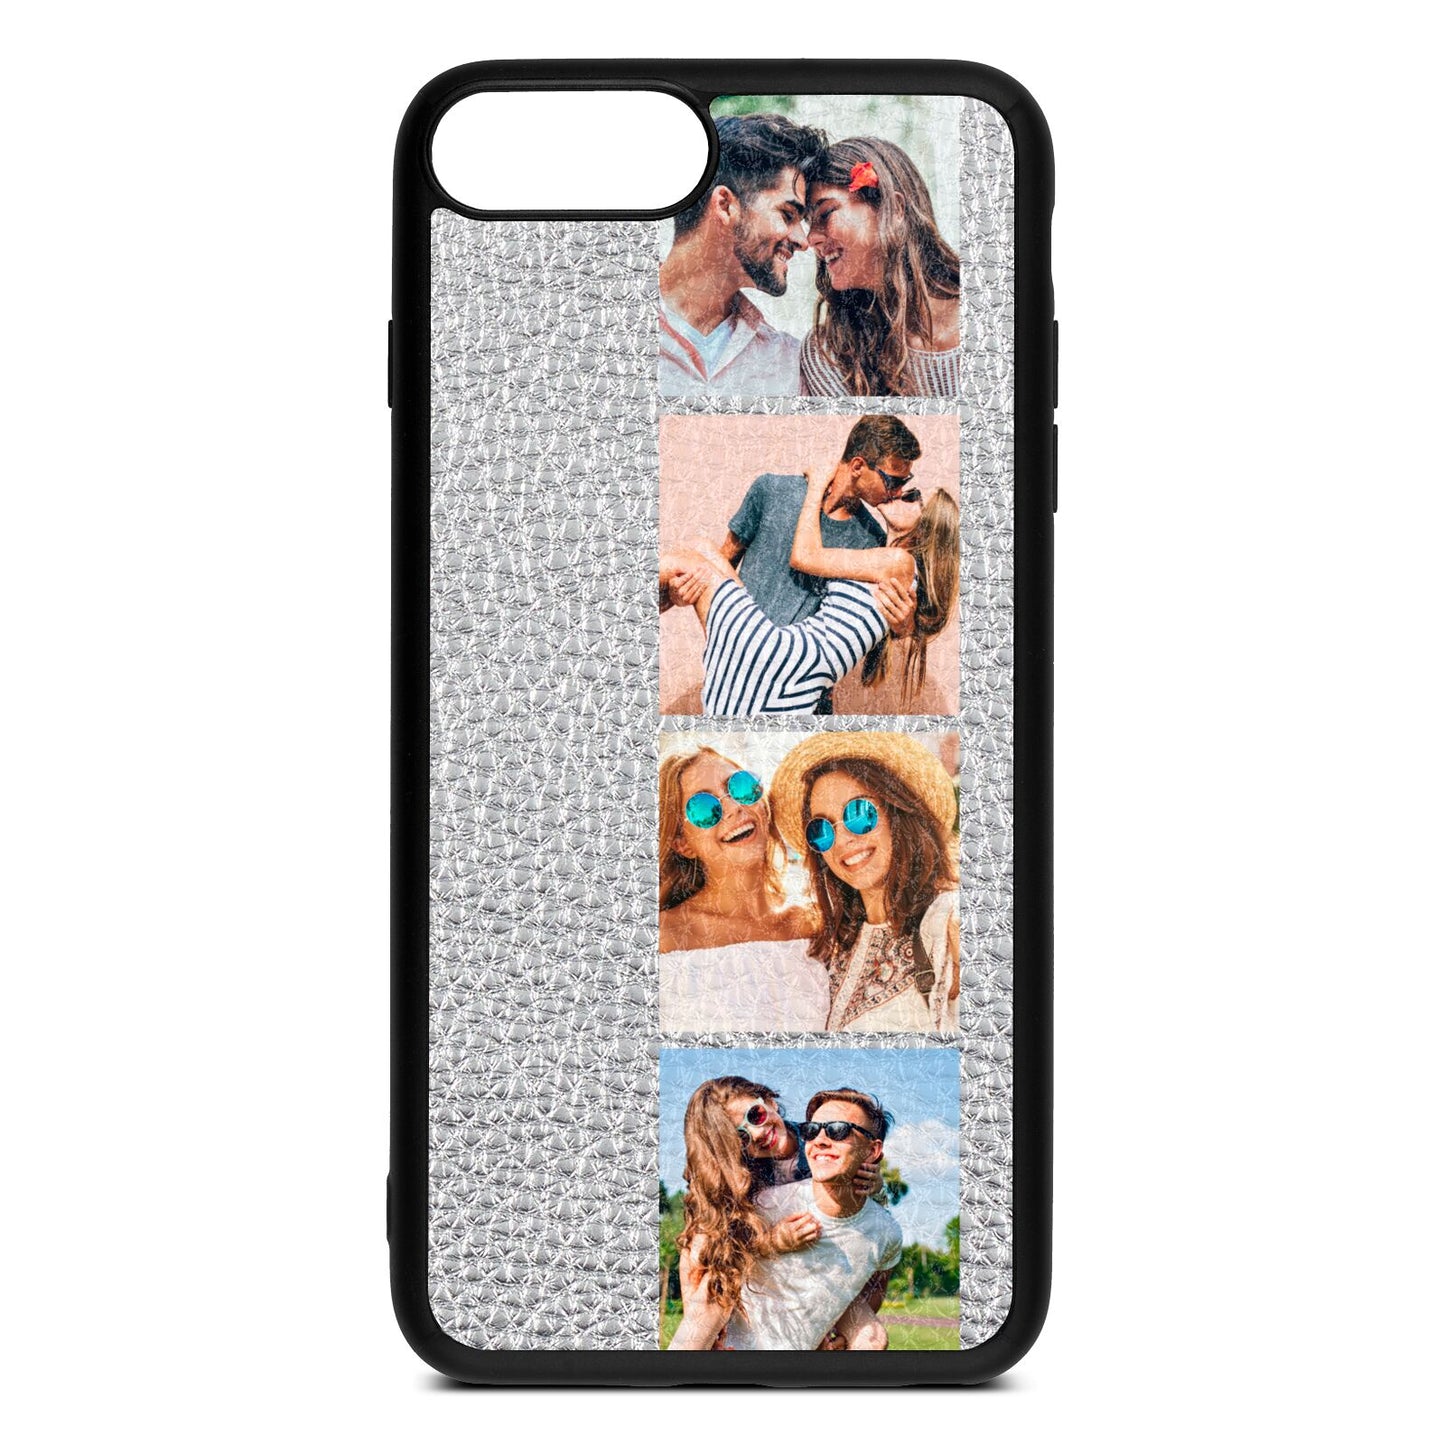 Photo Strip Montage Upload Silver Pebble Leather iPhone 8 Plus Case